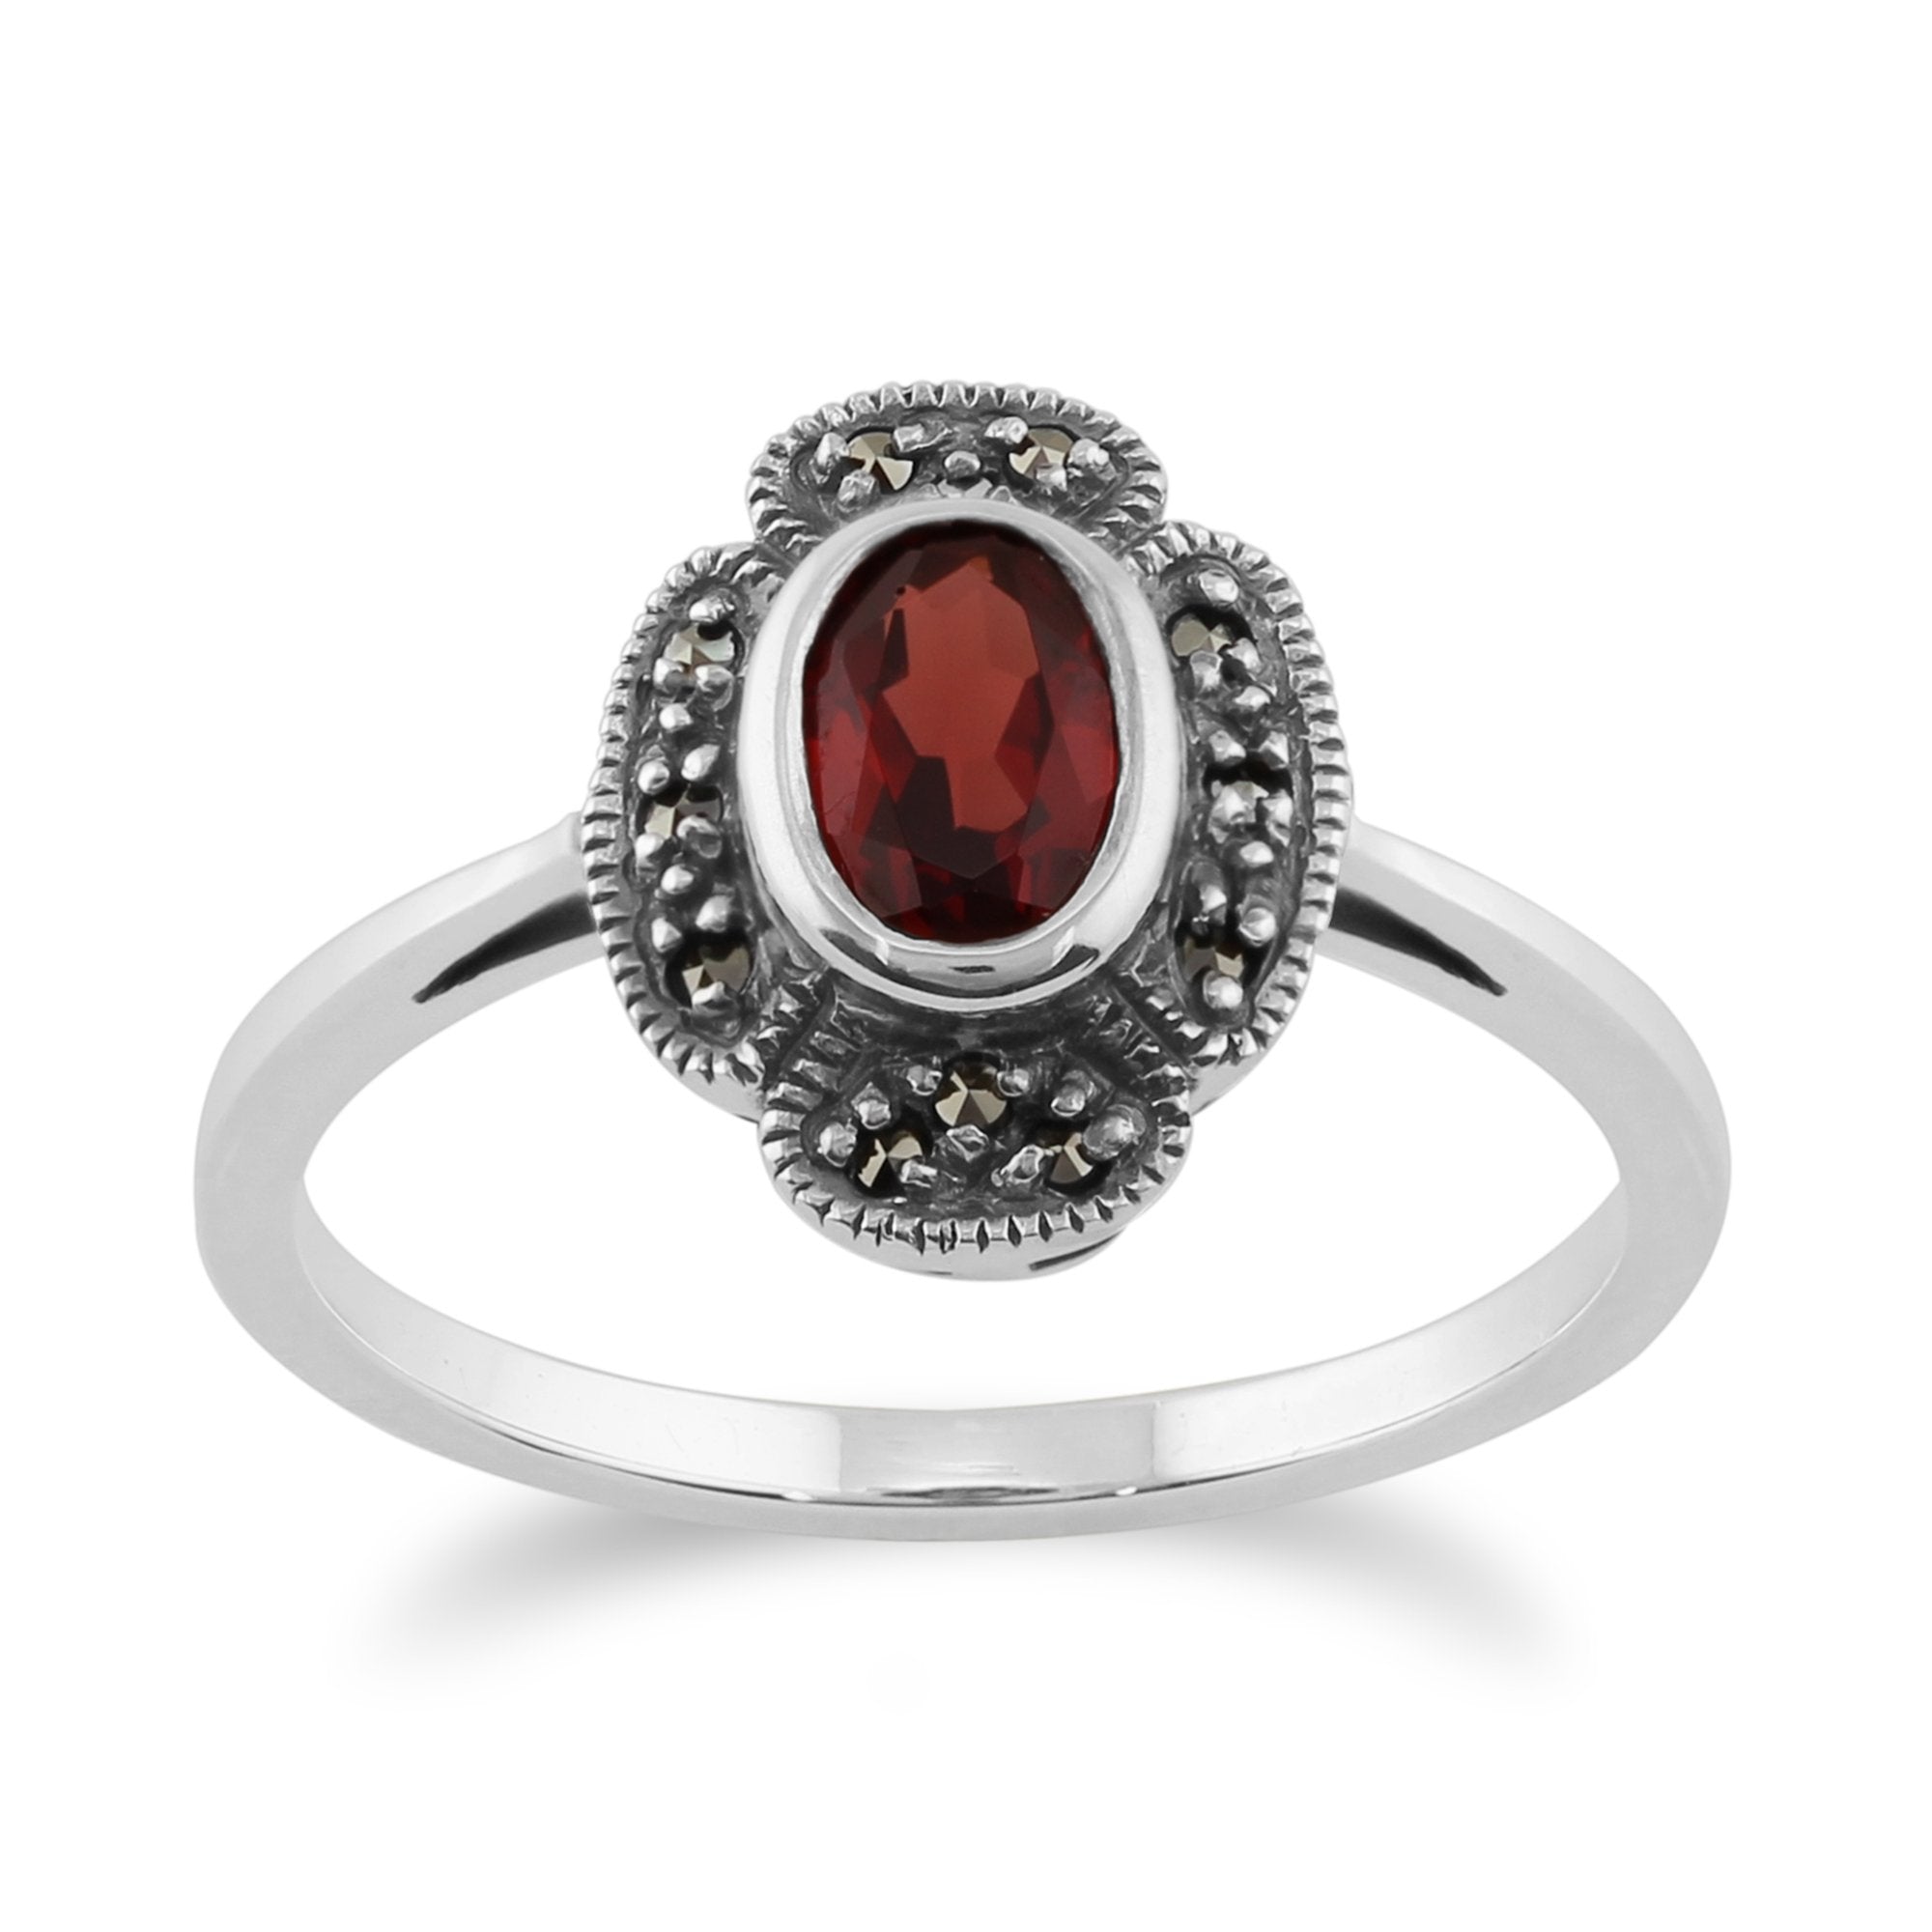 Art Deco Style Oval Garnet & Marcasite Ring in 925 Sterling Silver